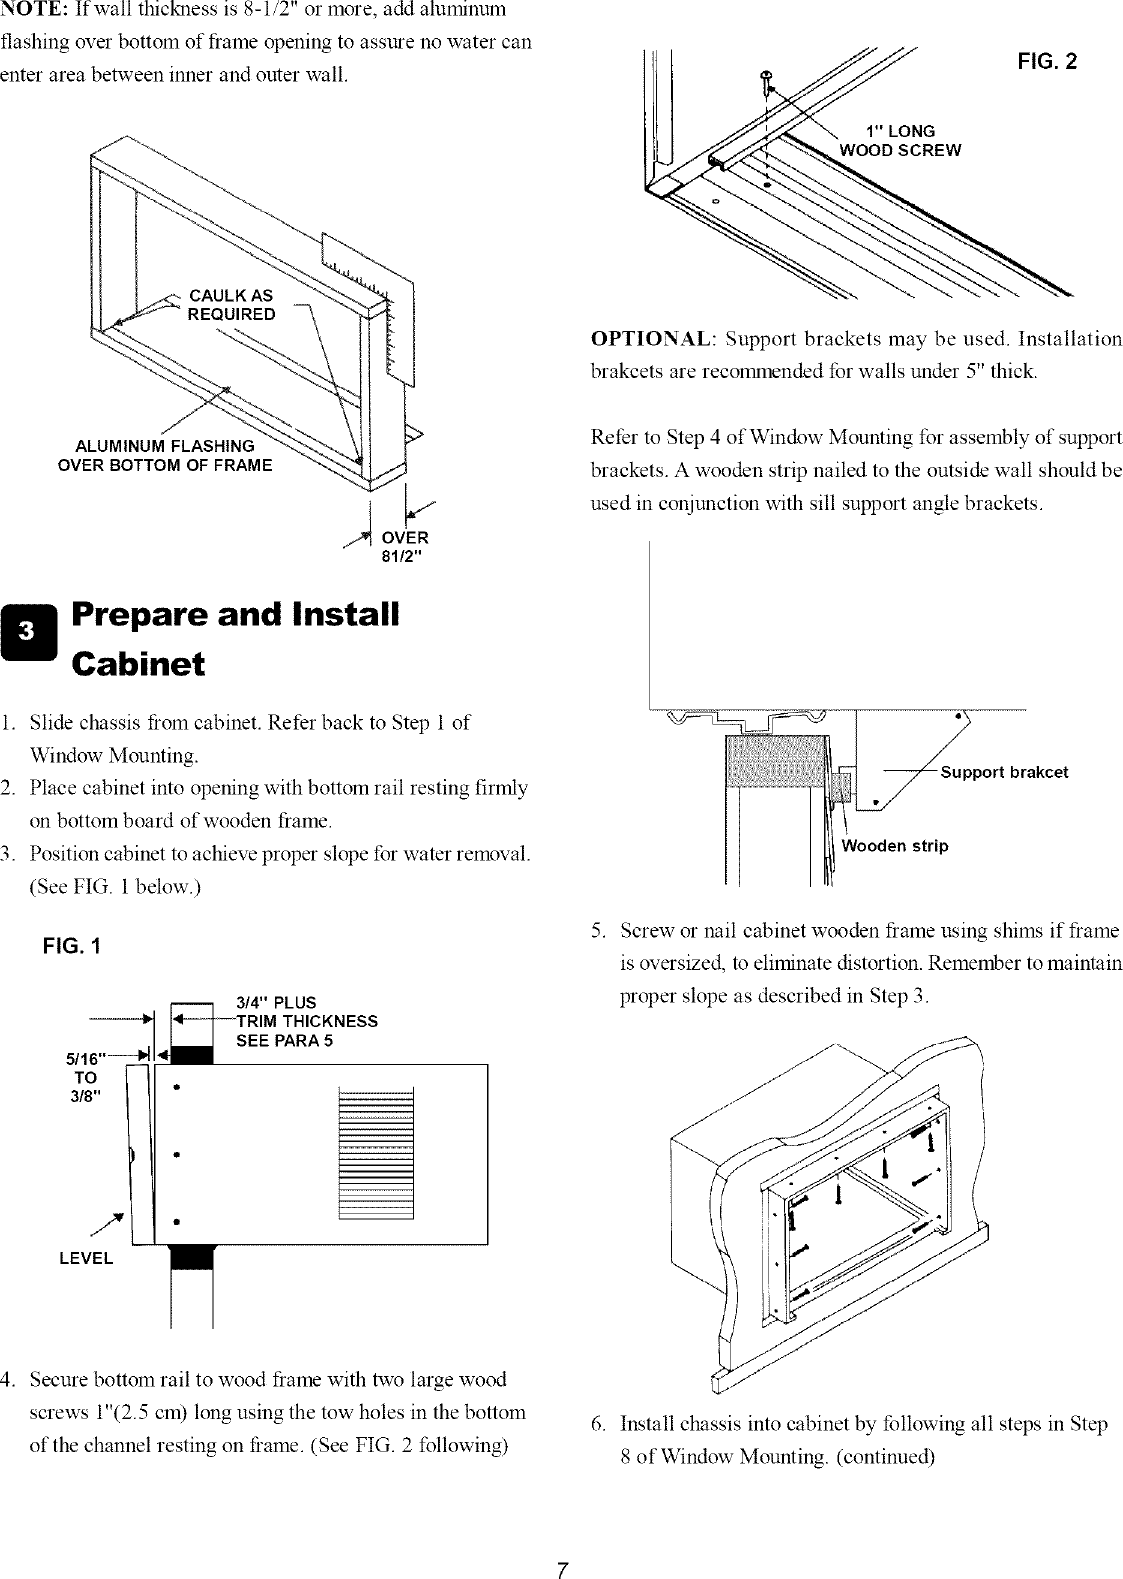 Page 7 of 8 - Frigidaire FAS156N1A2 User Manual  AIR CONDITIONER - Manuals And Guides L0523213